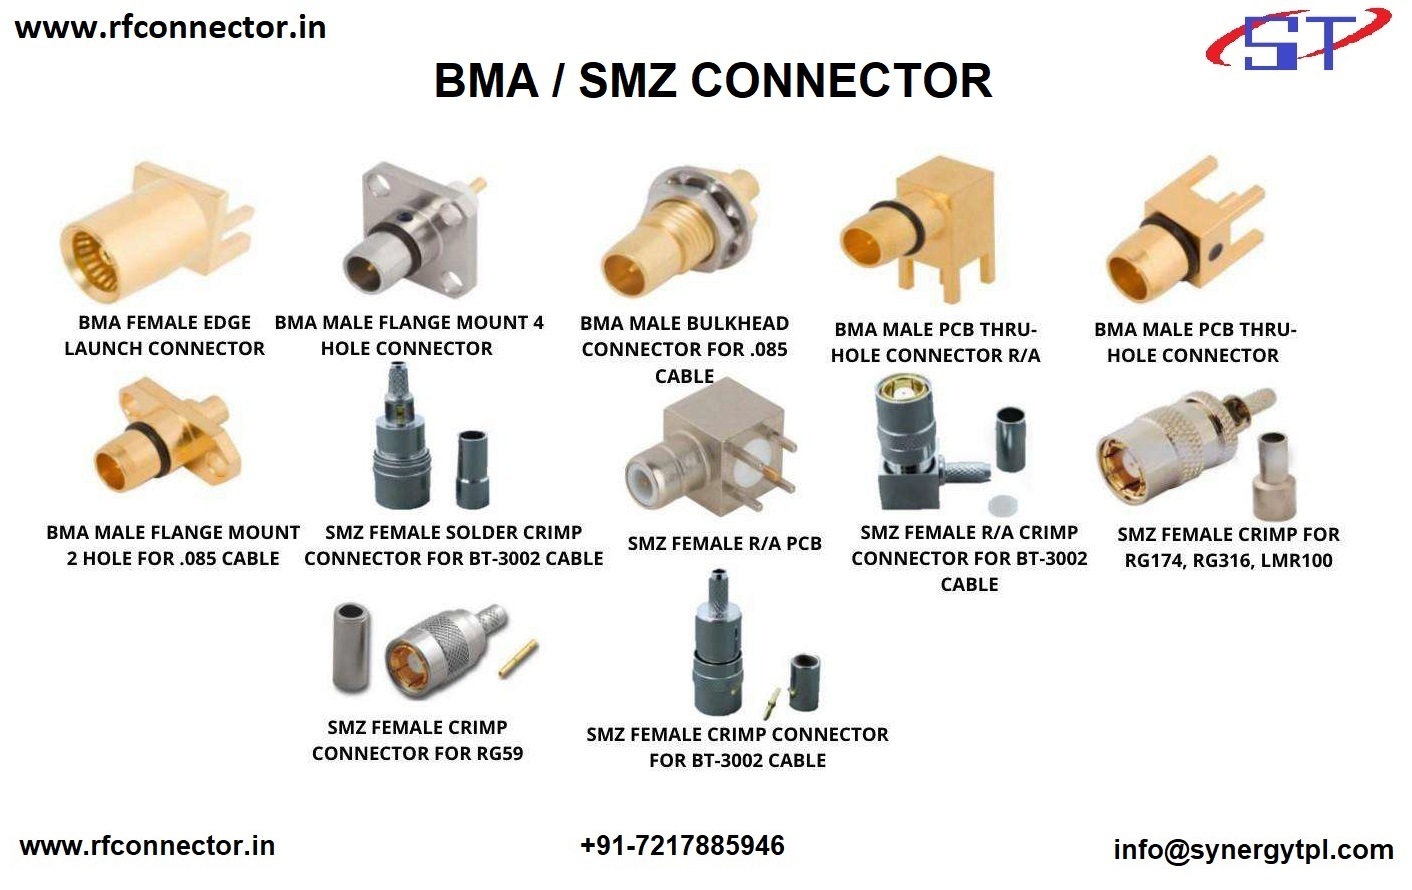 TNC male crimp connector for LMR 400 cable